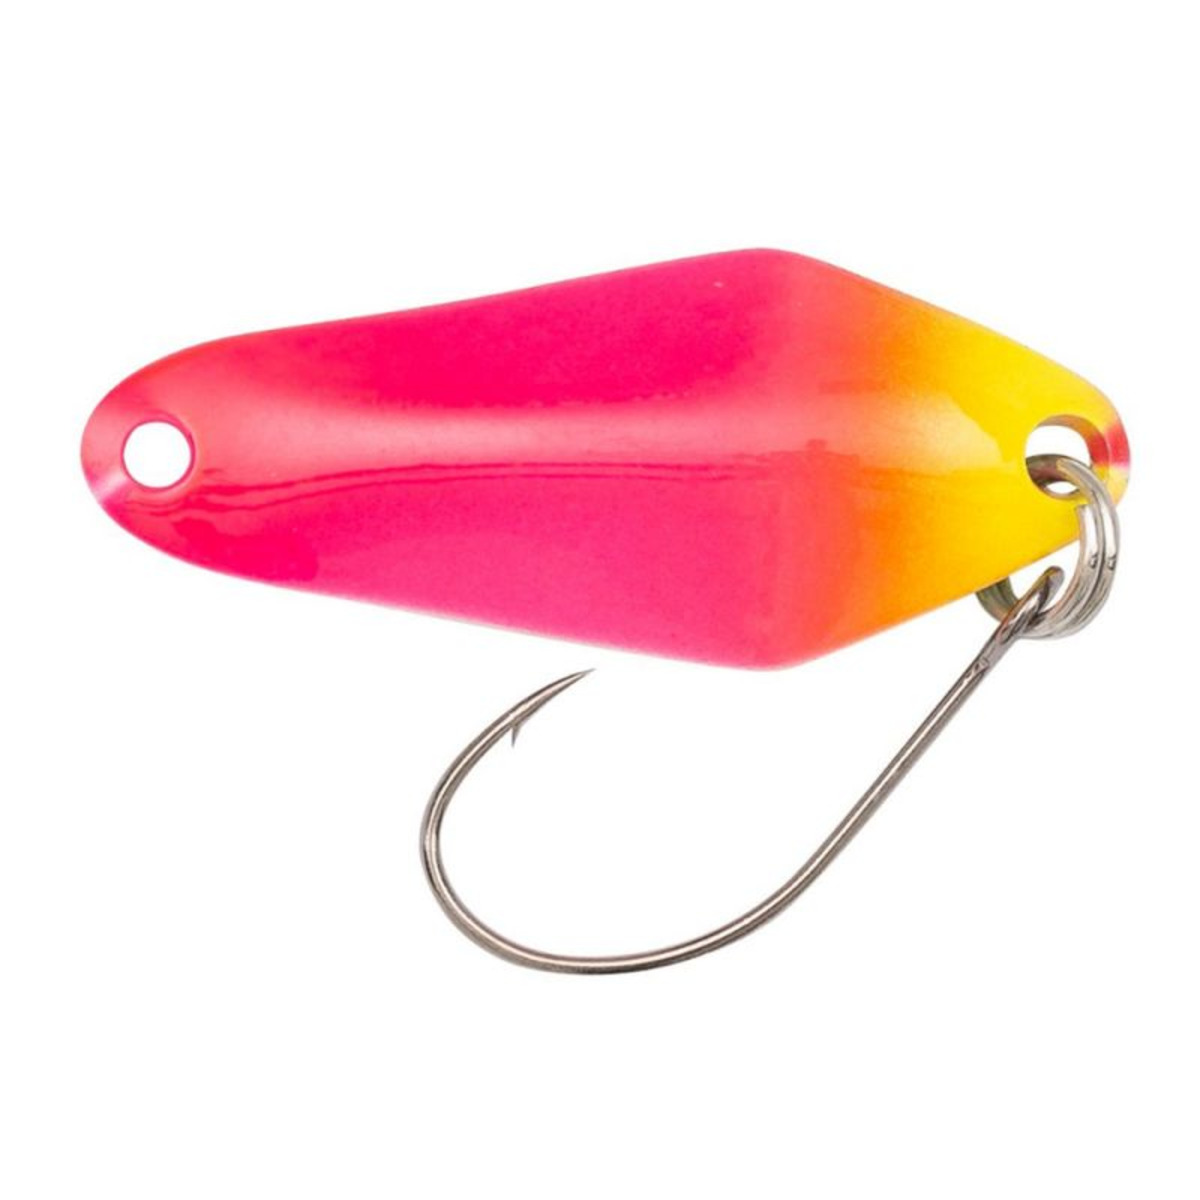 Berkley Area Game Spoons Chisai - 1.5 g - 2.00 cm - Chartreuse Front-Fucsia Back